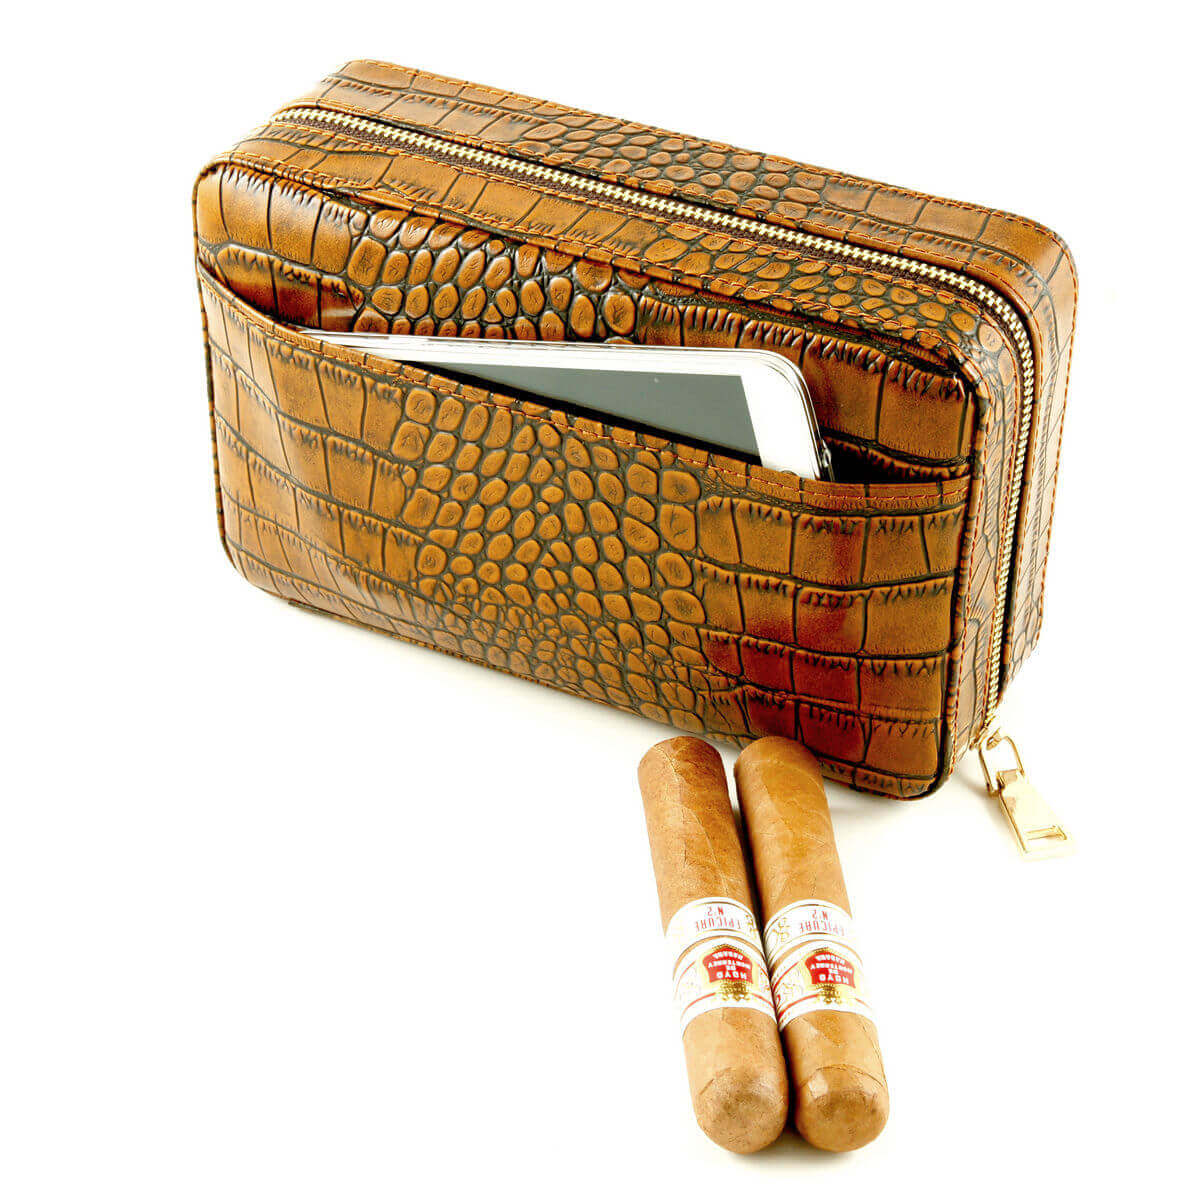 leather travel humidors for cigars